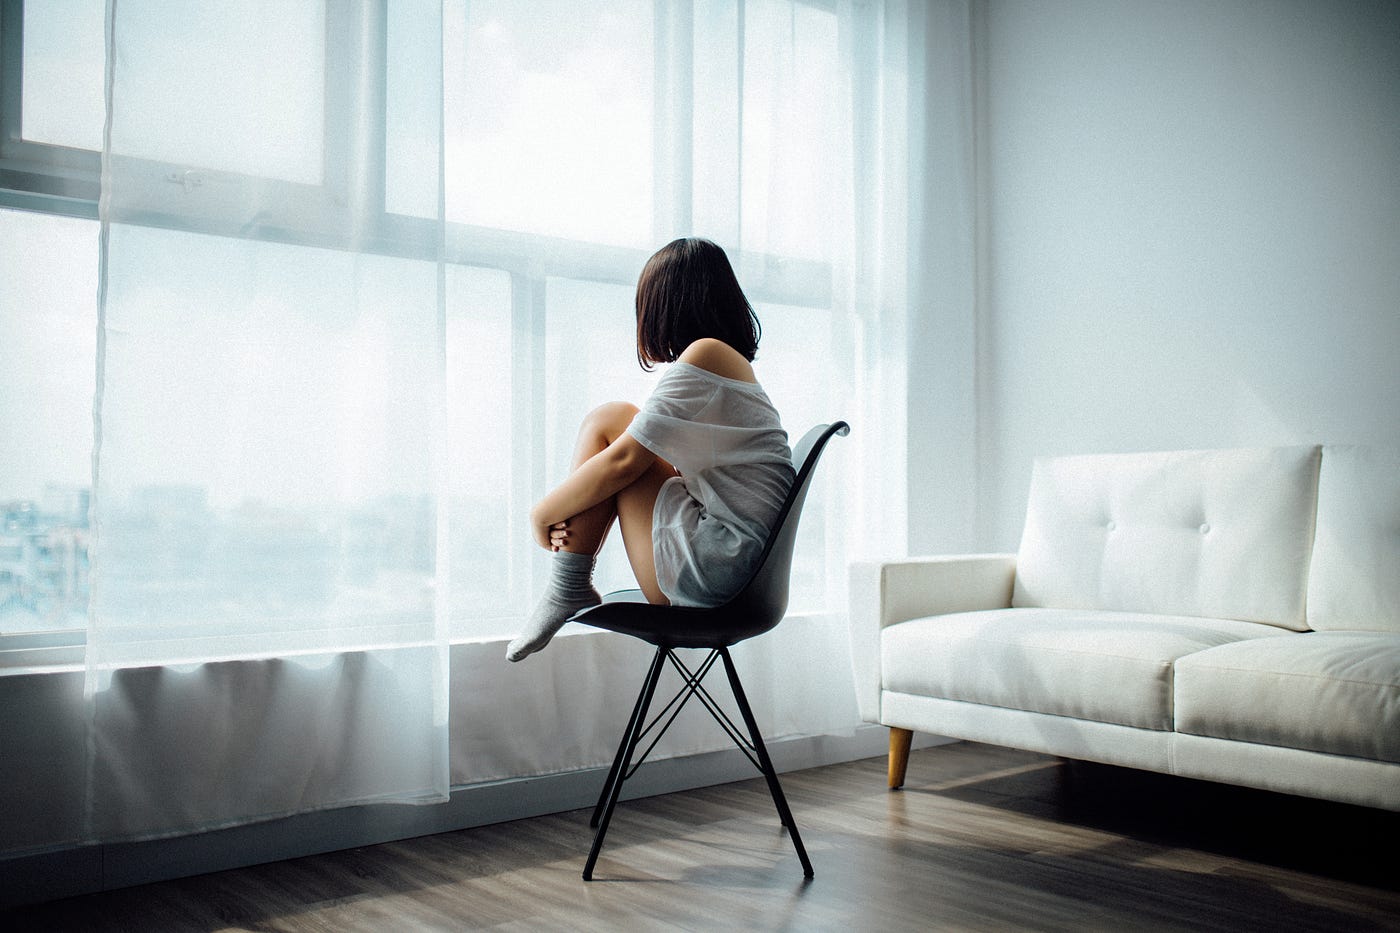 Person sitting on a chair with their knees to their chest, staring out a wide window.